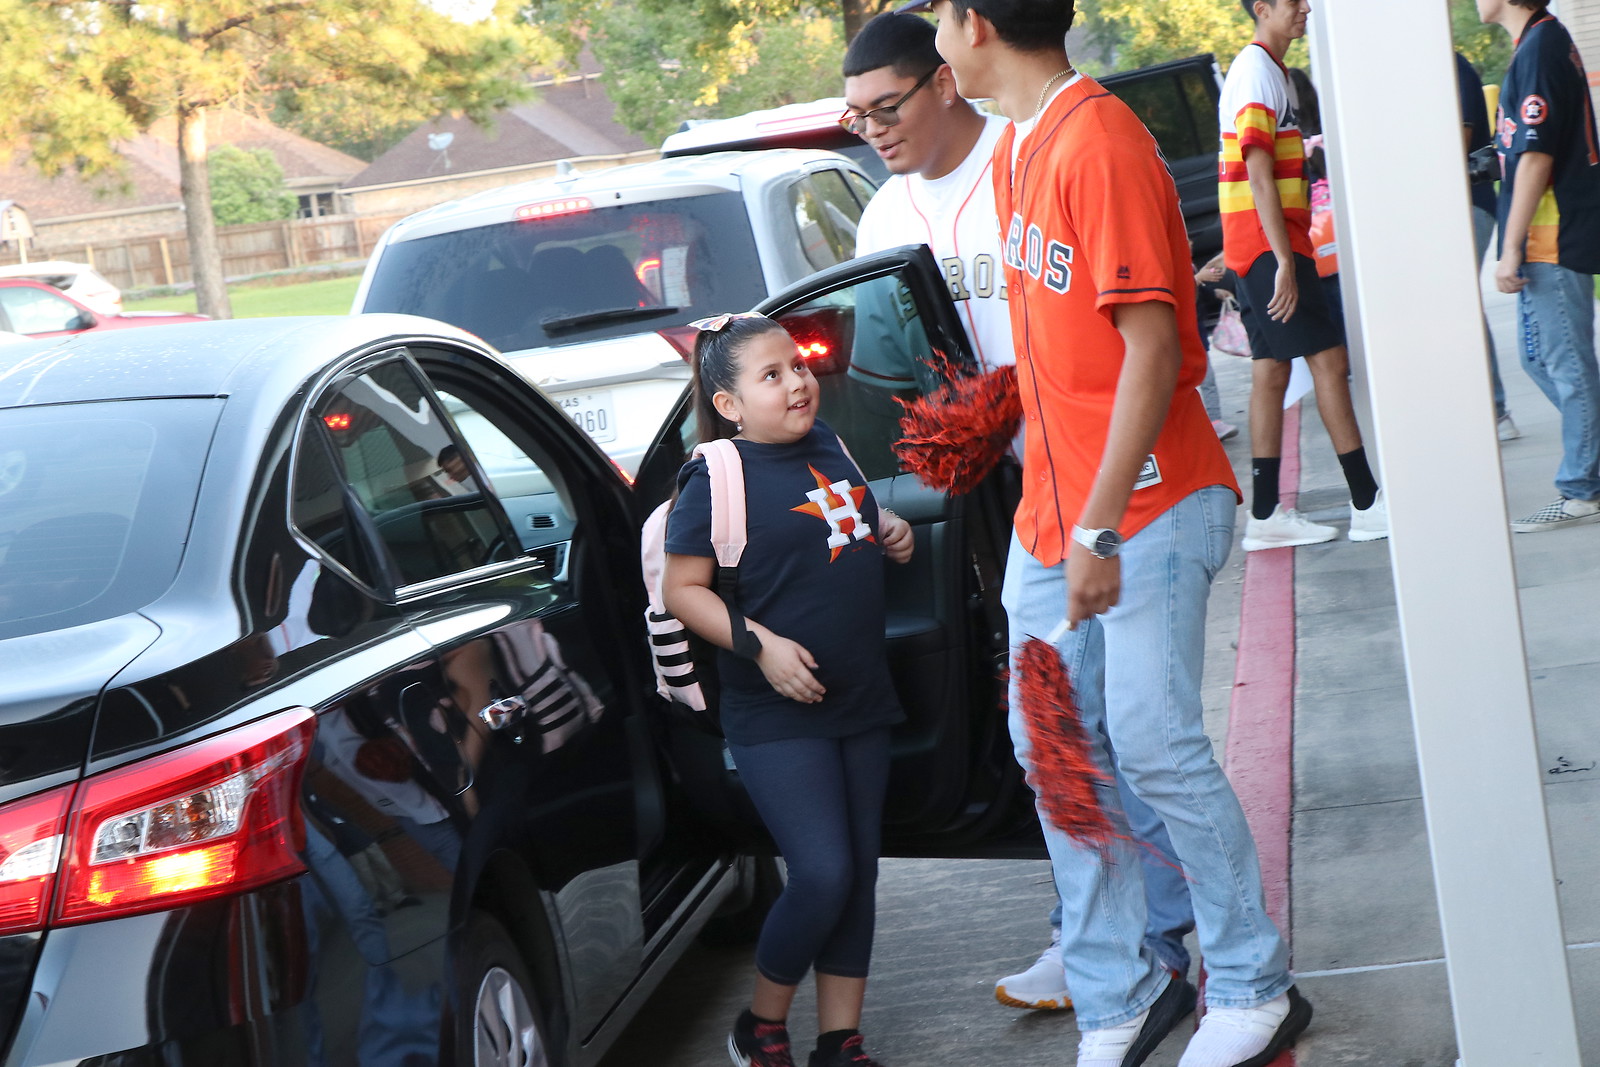 Robert E. Lee High School baseball players (left) Sergio Cortes and Izayah Hernandez help Travis Elementary third-grader Julacy Torres with the car door as she arrives at school.